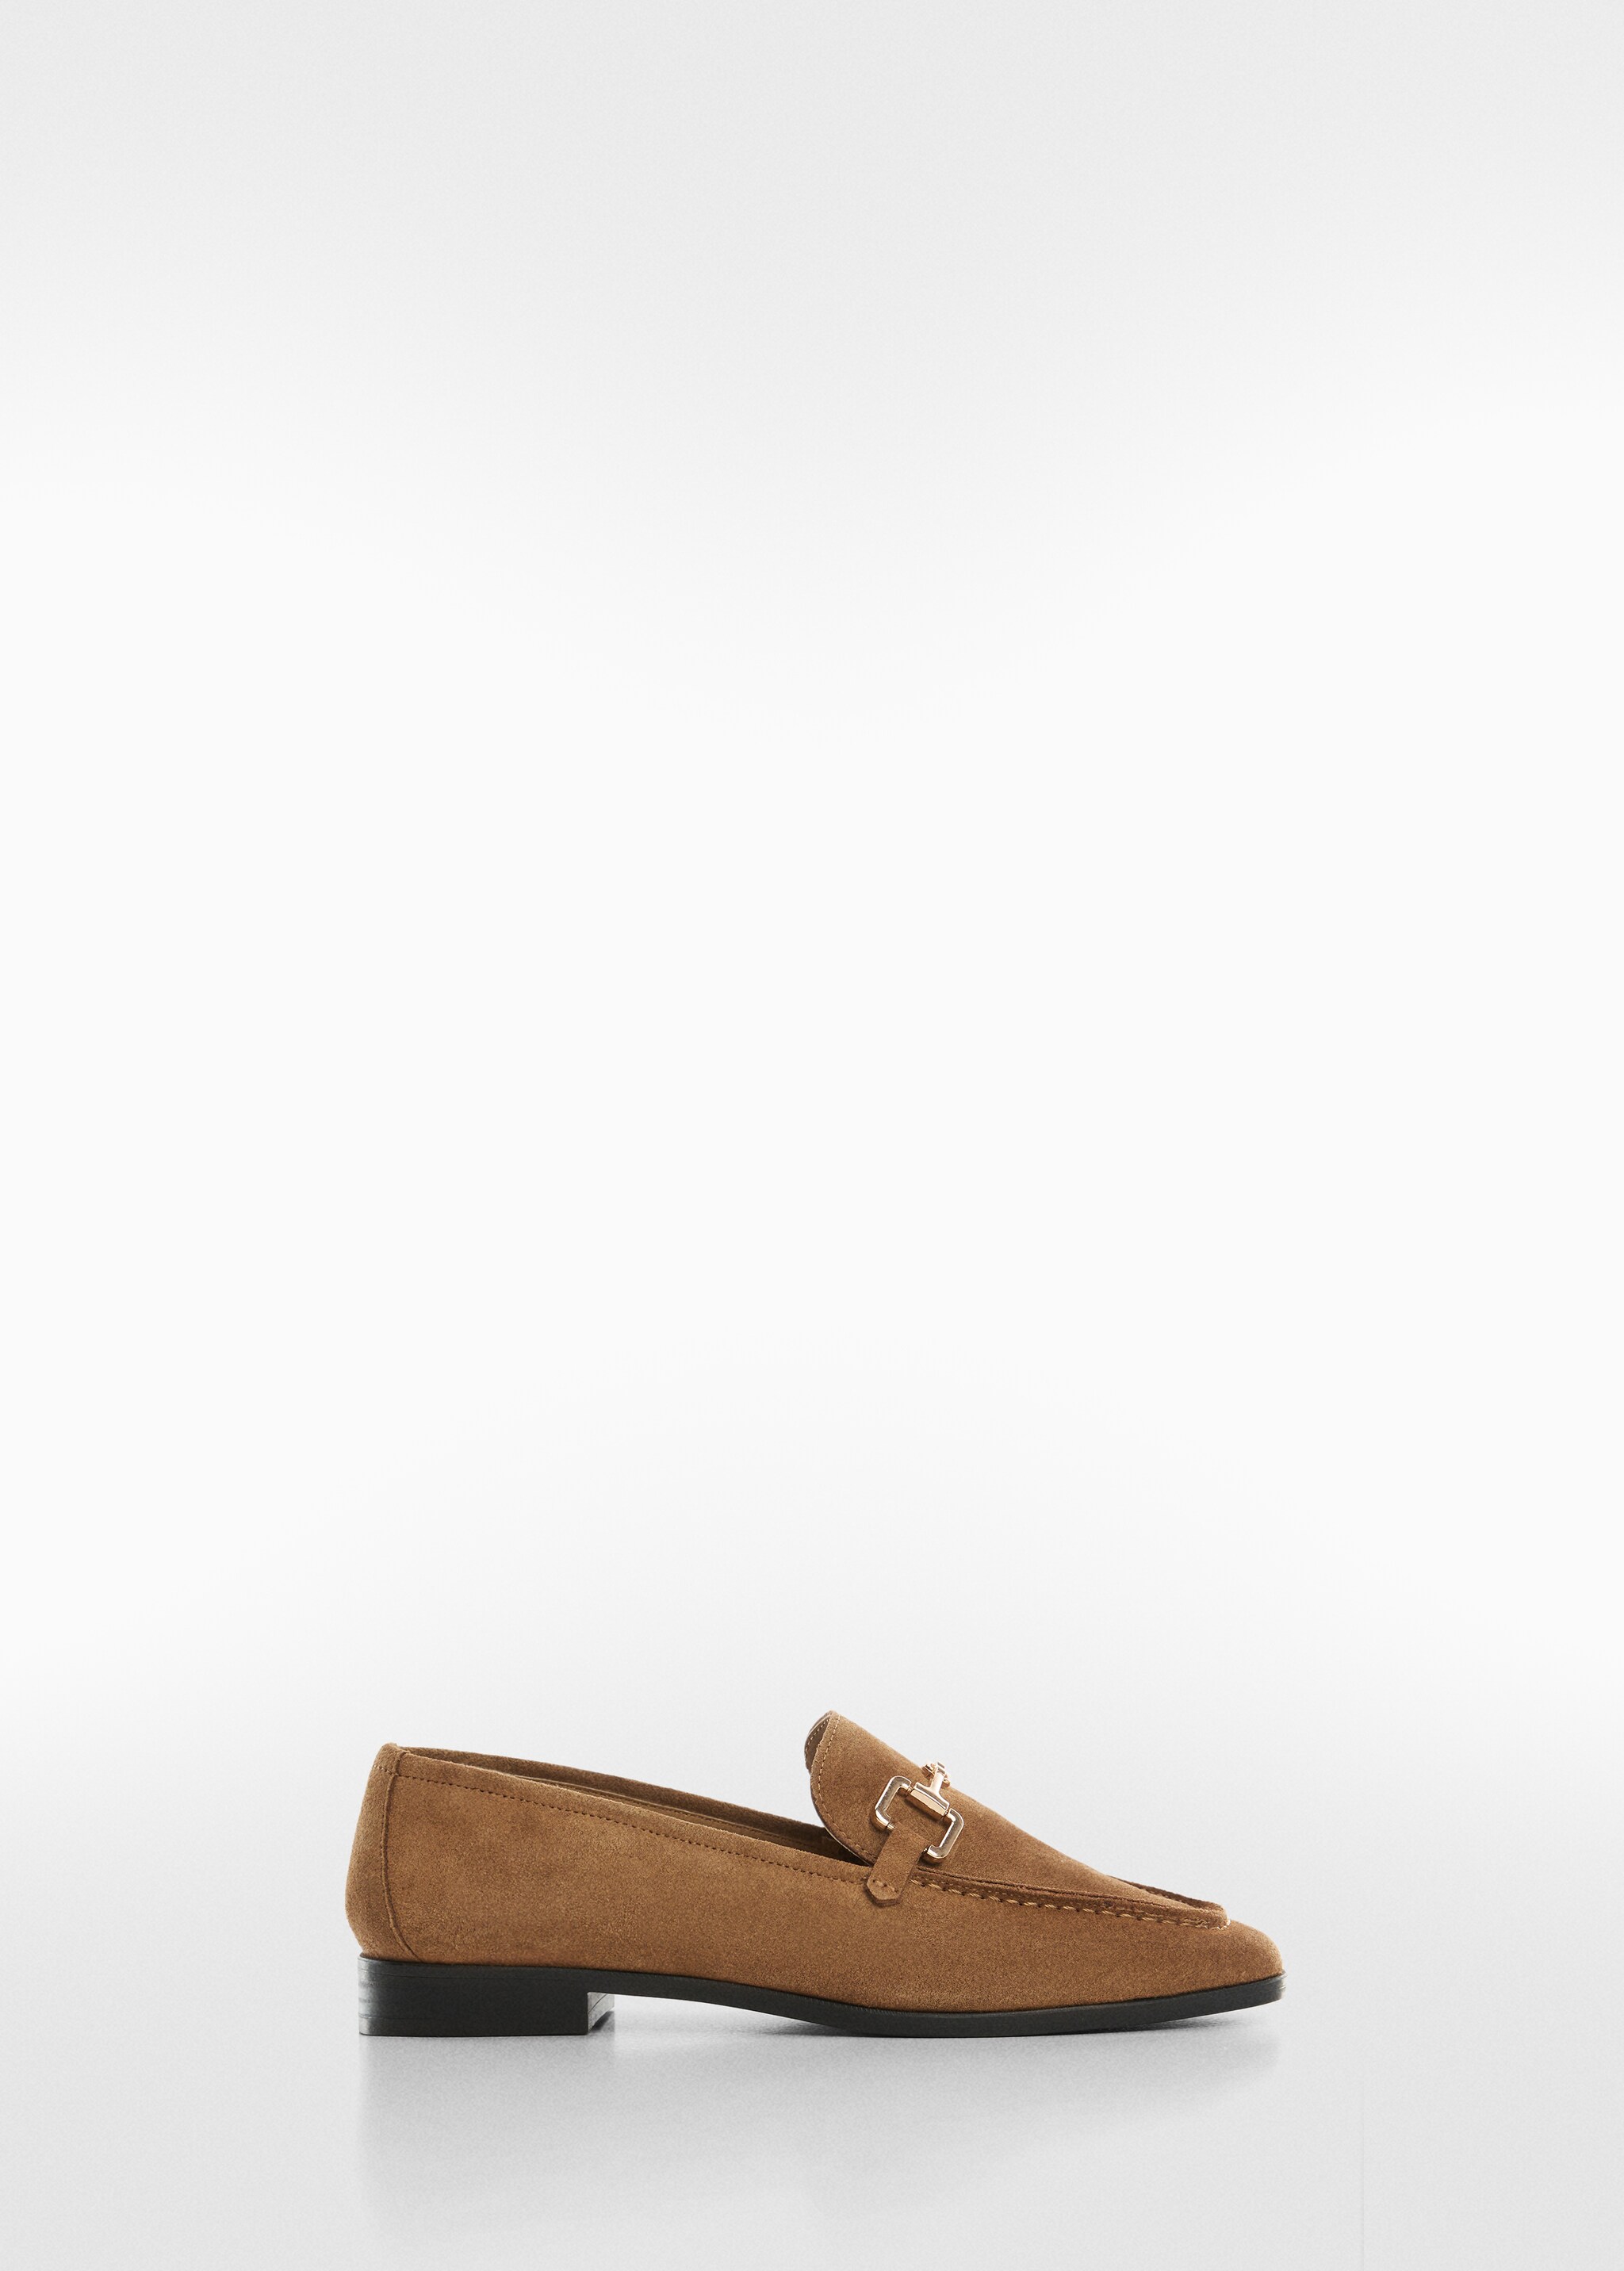 Suede leather moccasin - Article without model